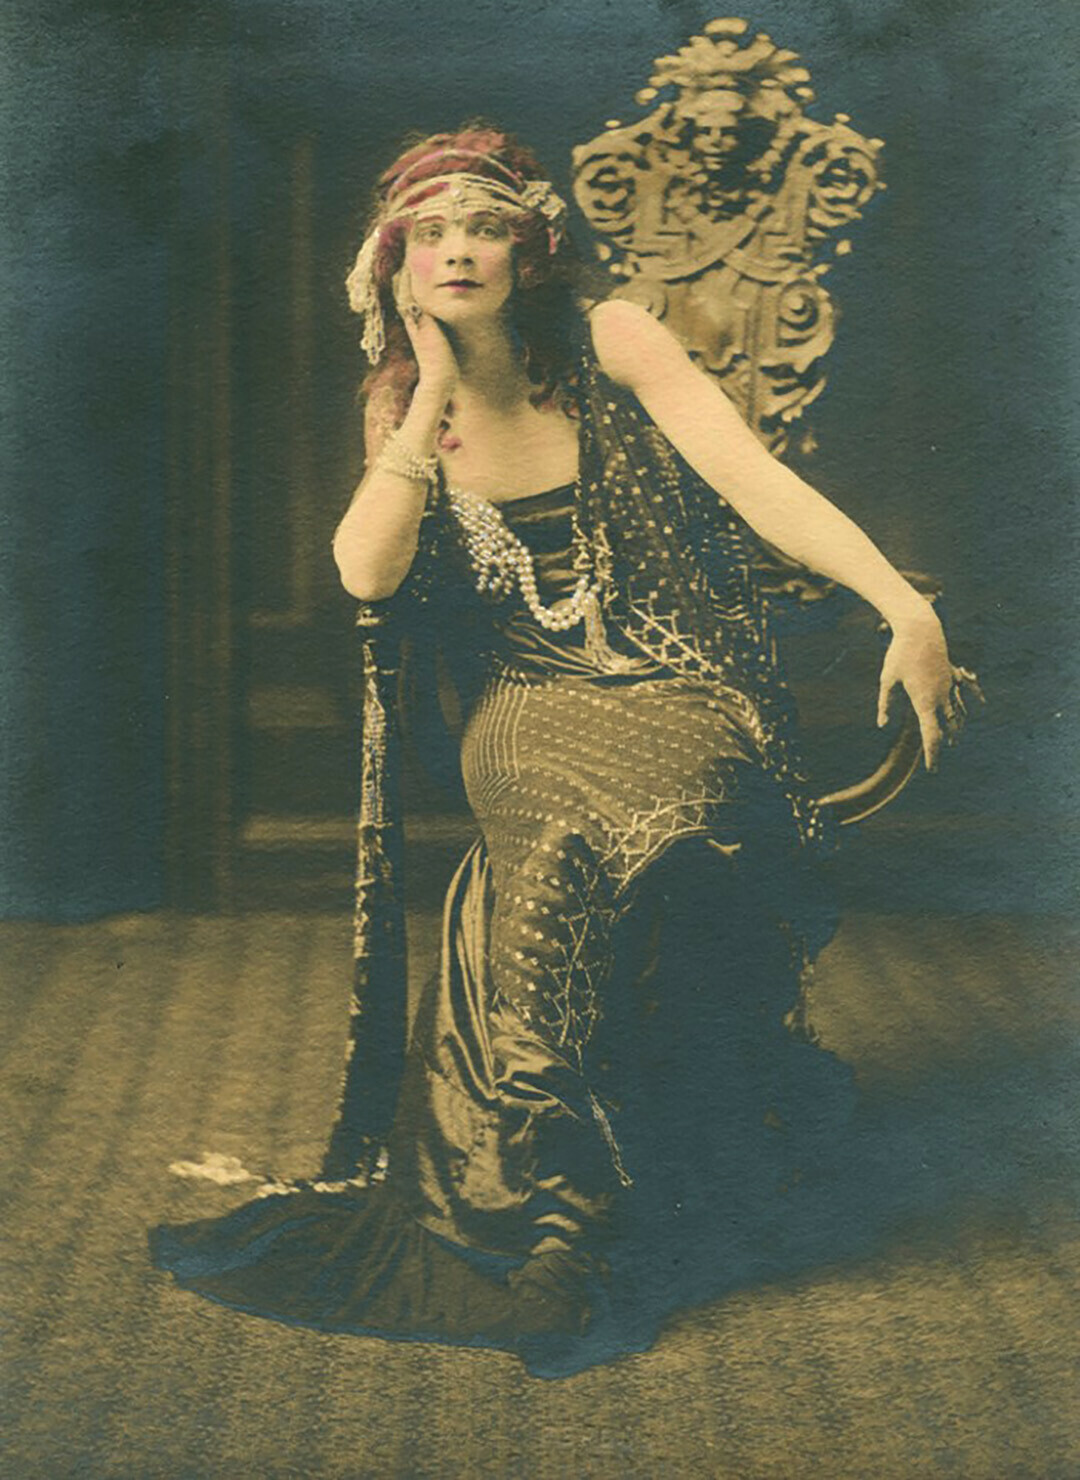 Rose King in her glamorous theatrical days. (Photo courtesy Chippewa Valley Museum)